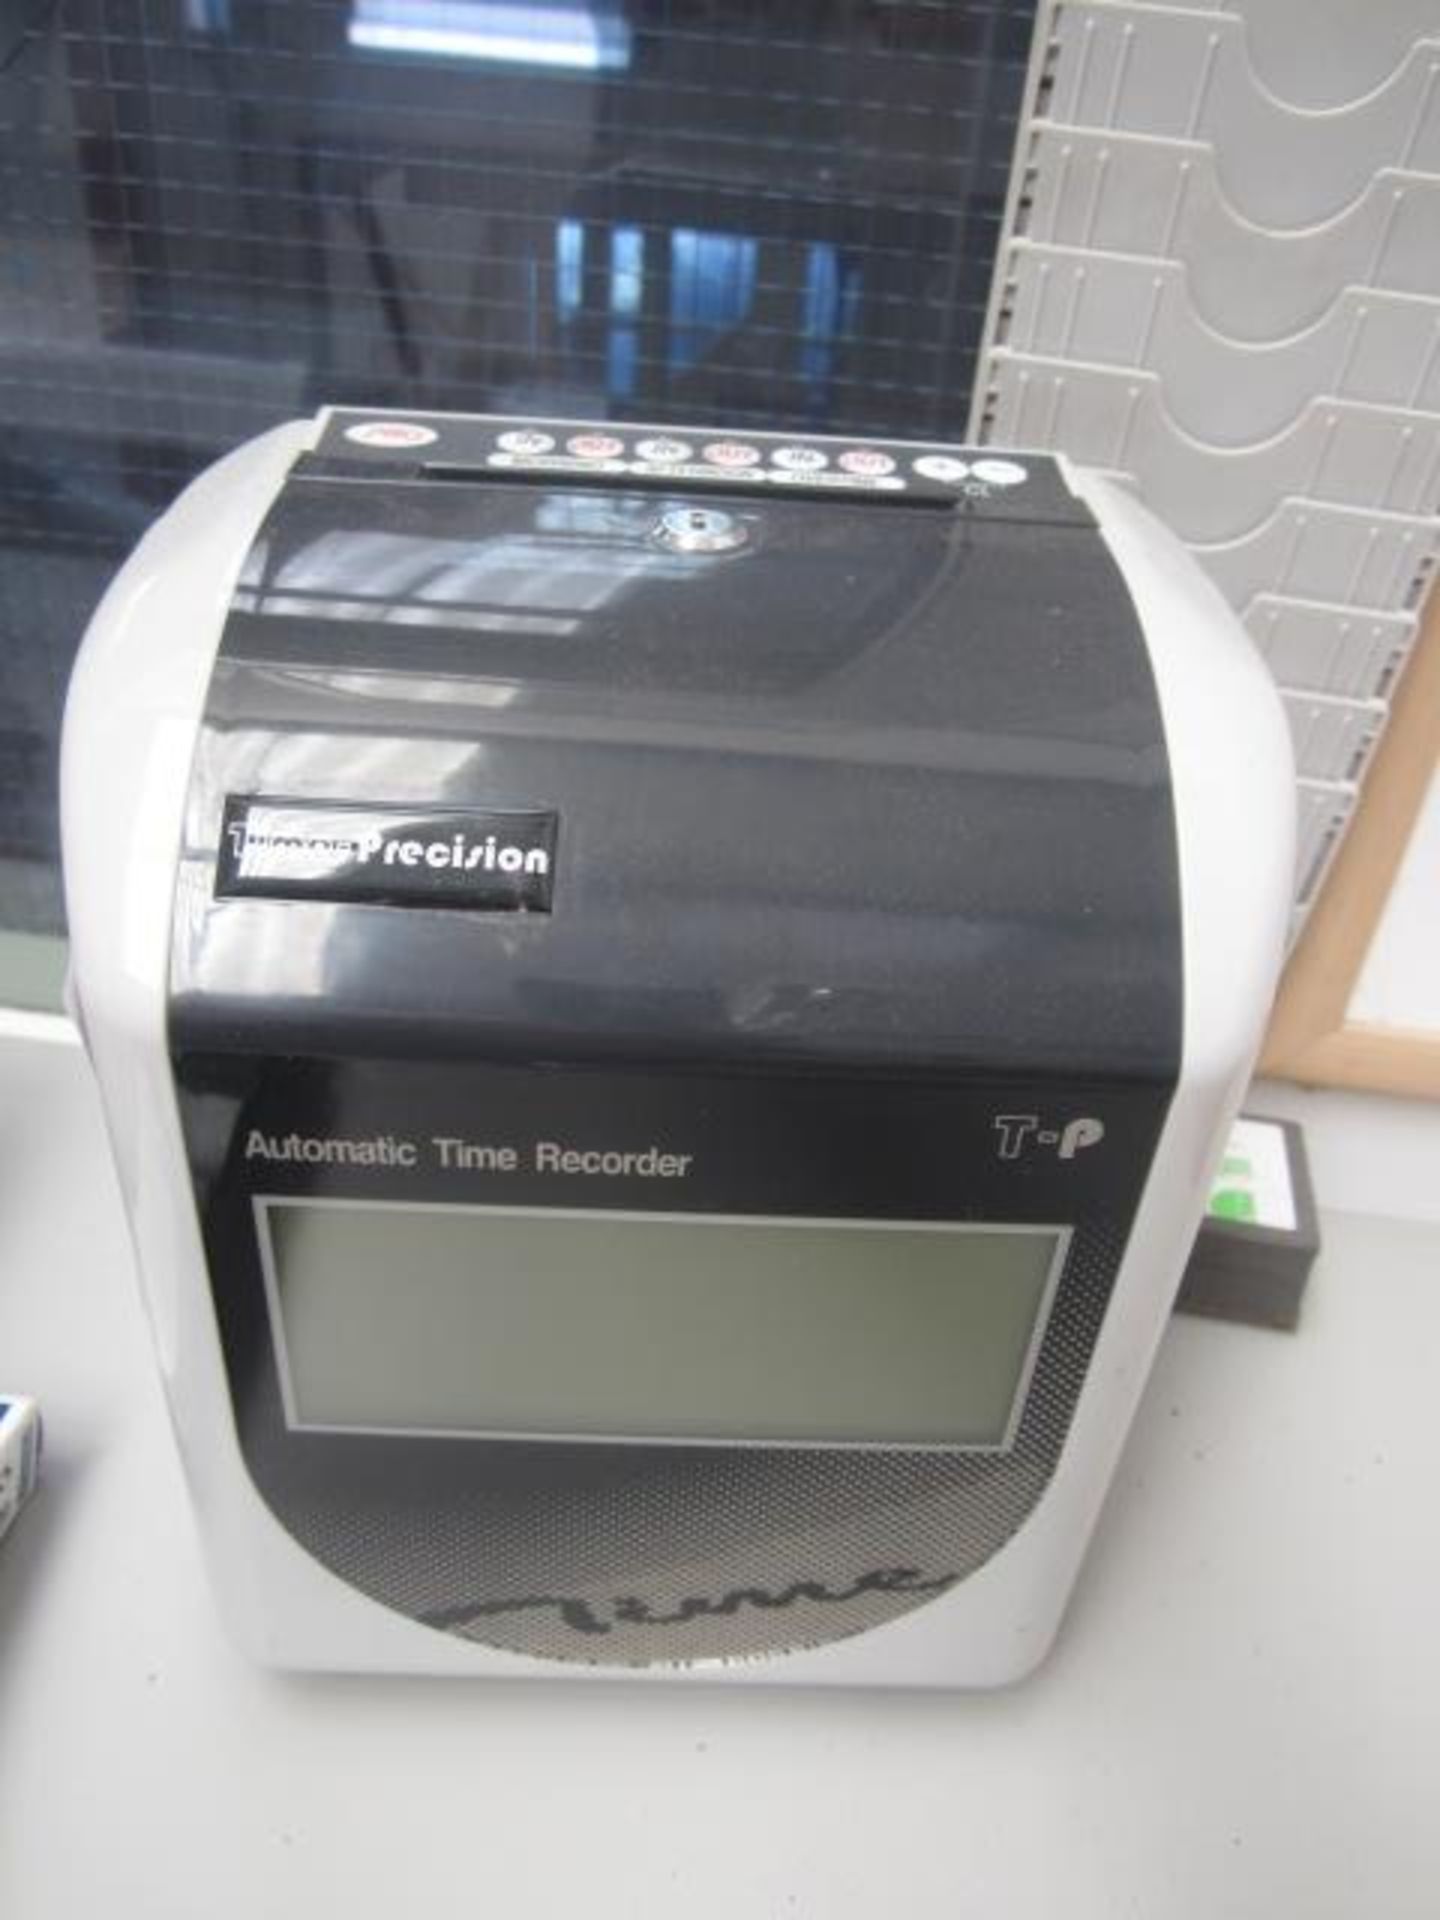 Time Precision T-P Automatic time record clock and card stock